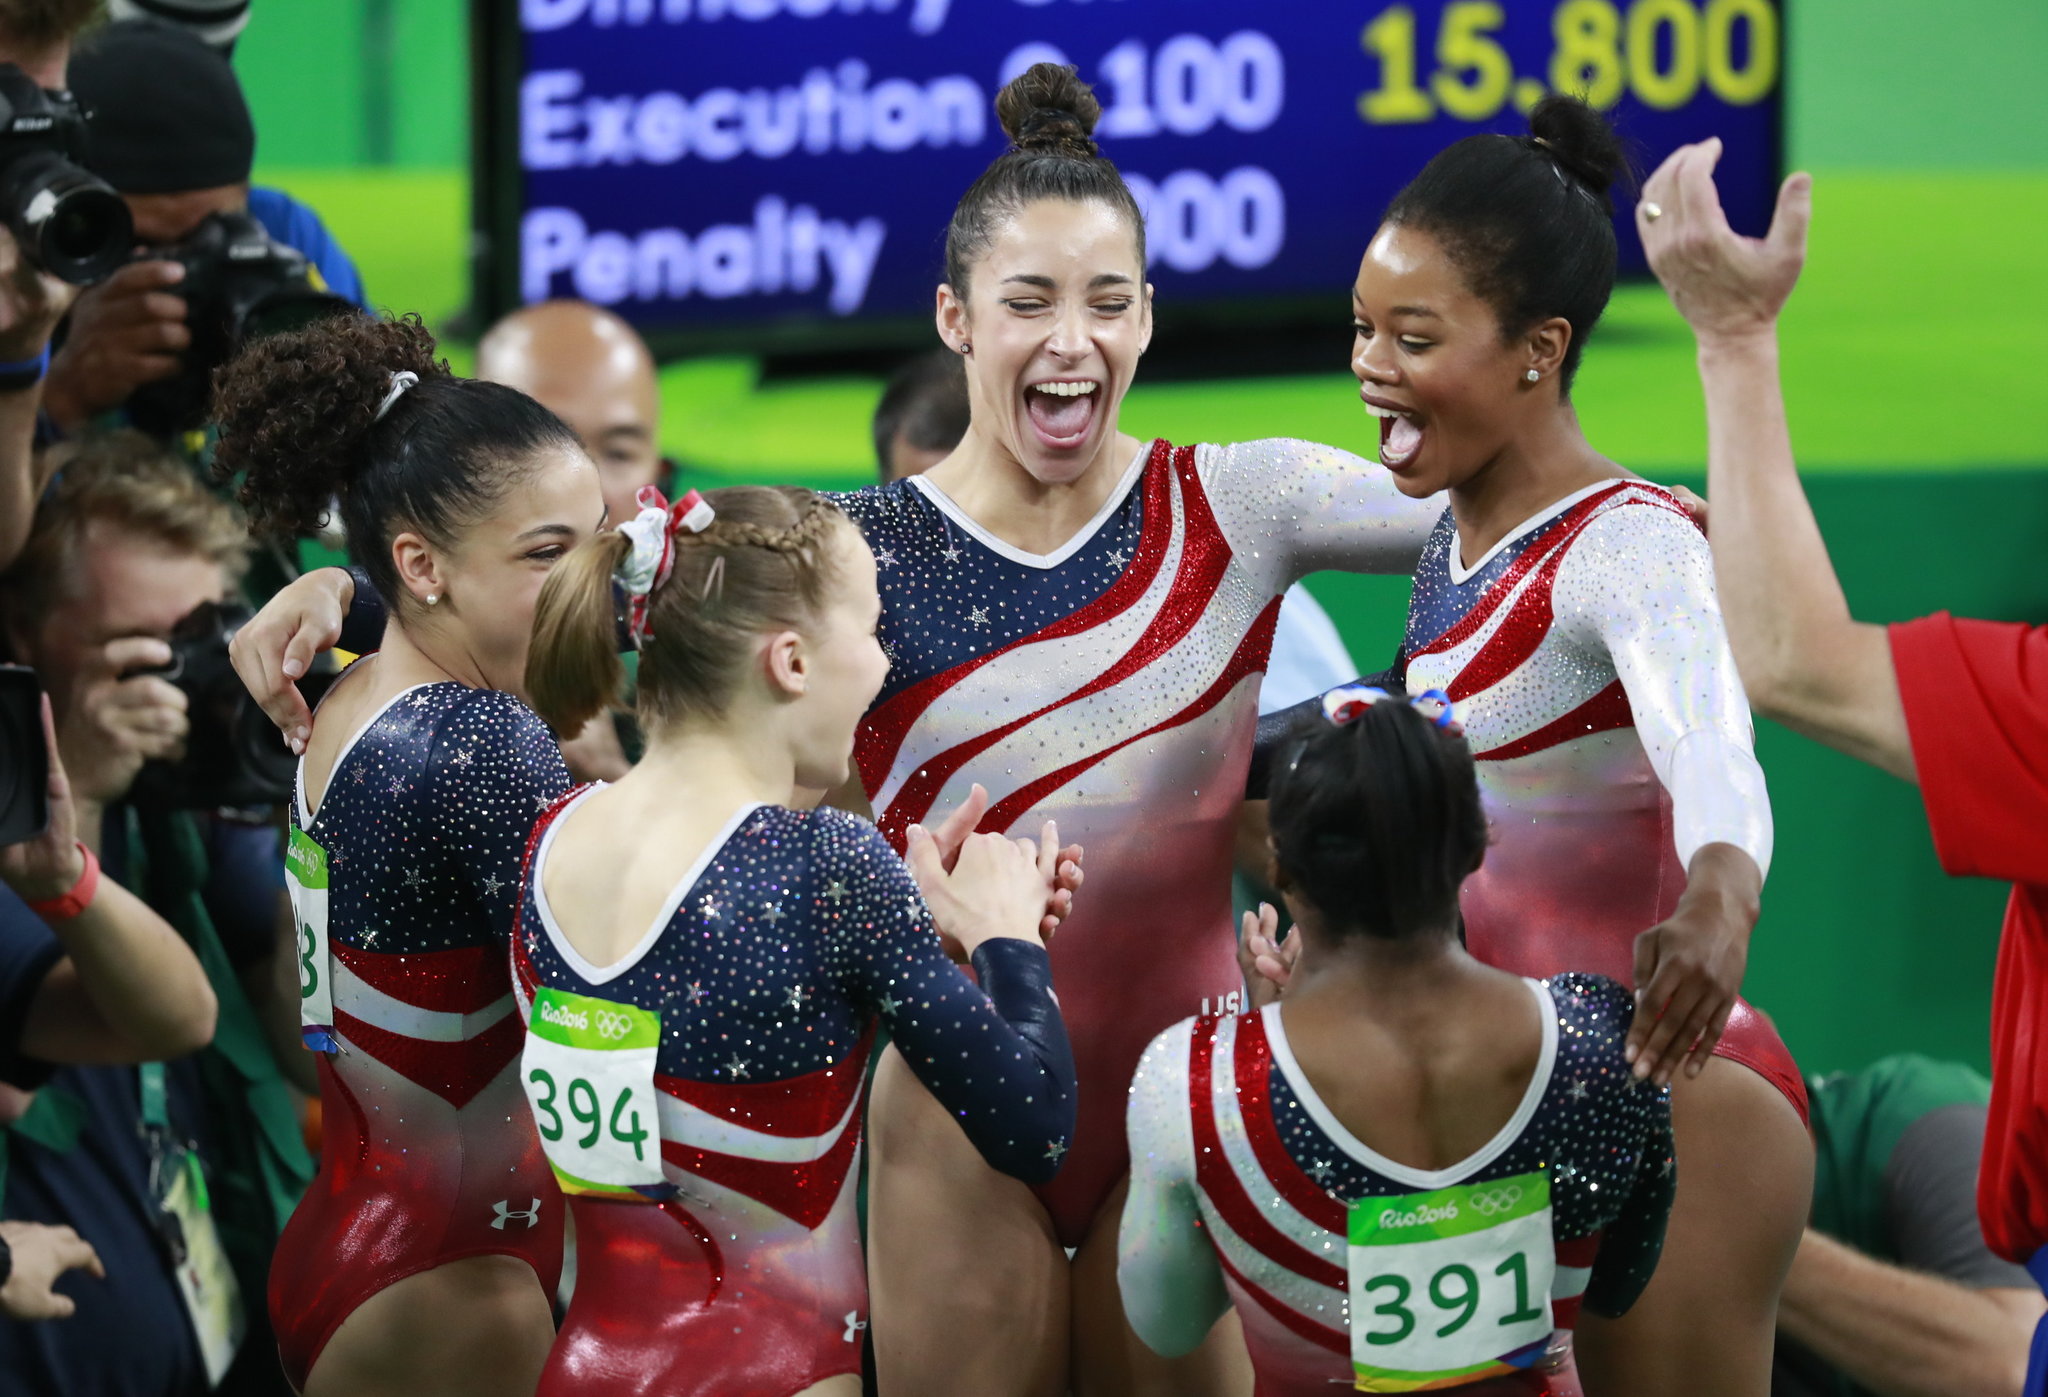 Armour: USA Gymnastics Returns to Competition after Year of Triumph, Turmoil